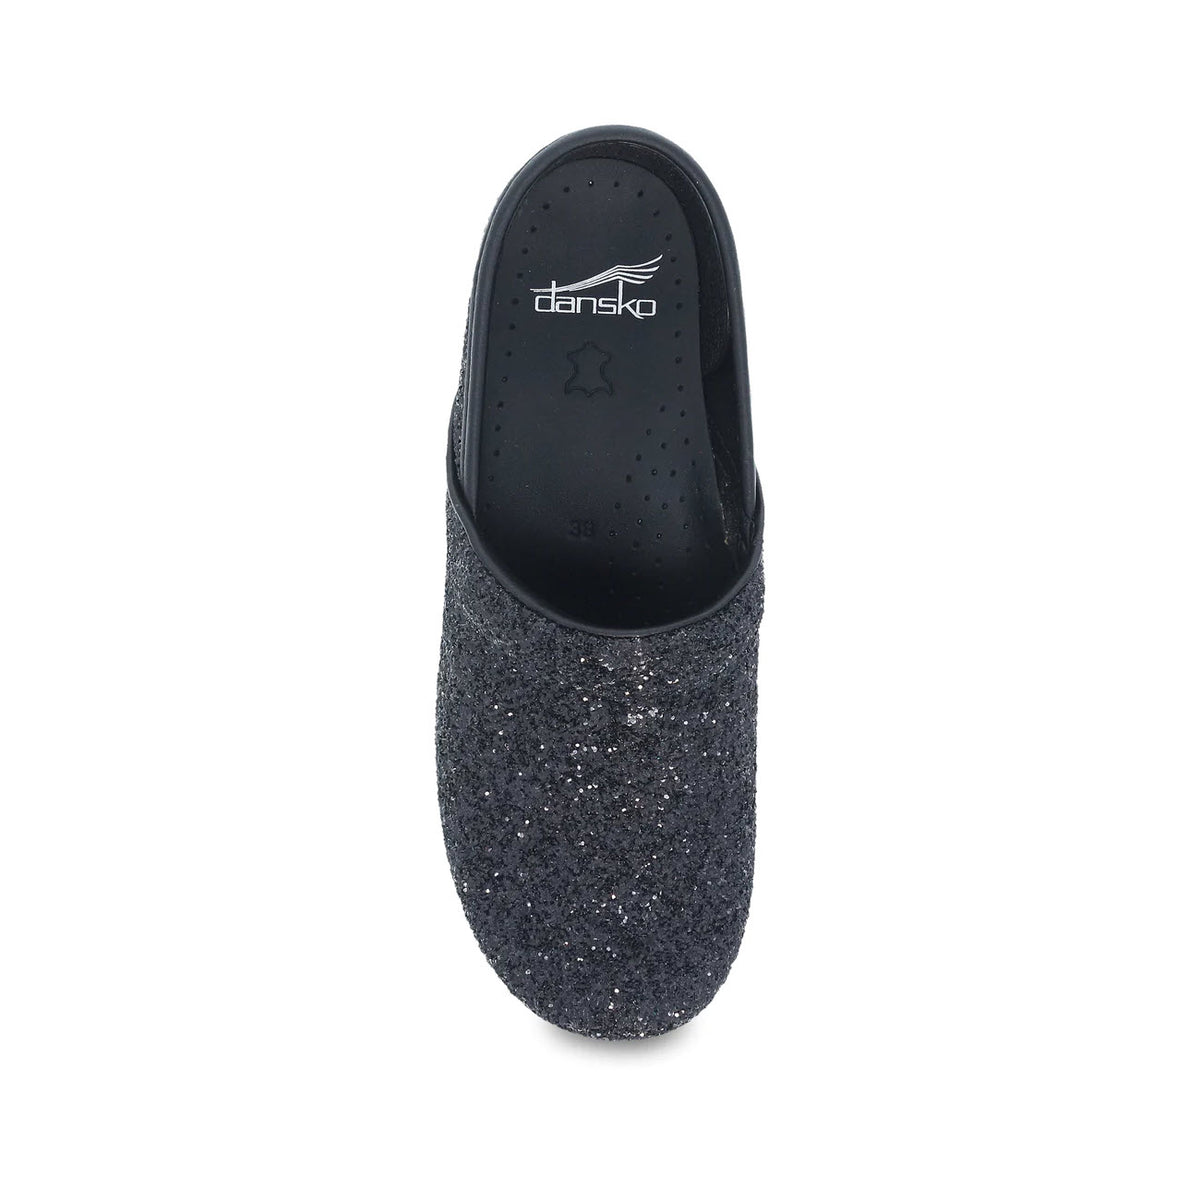 A top view of a single Dansko Professional clog with a sparkling black glitter exterior, displayed on a white background.